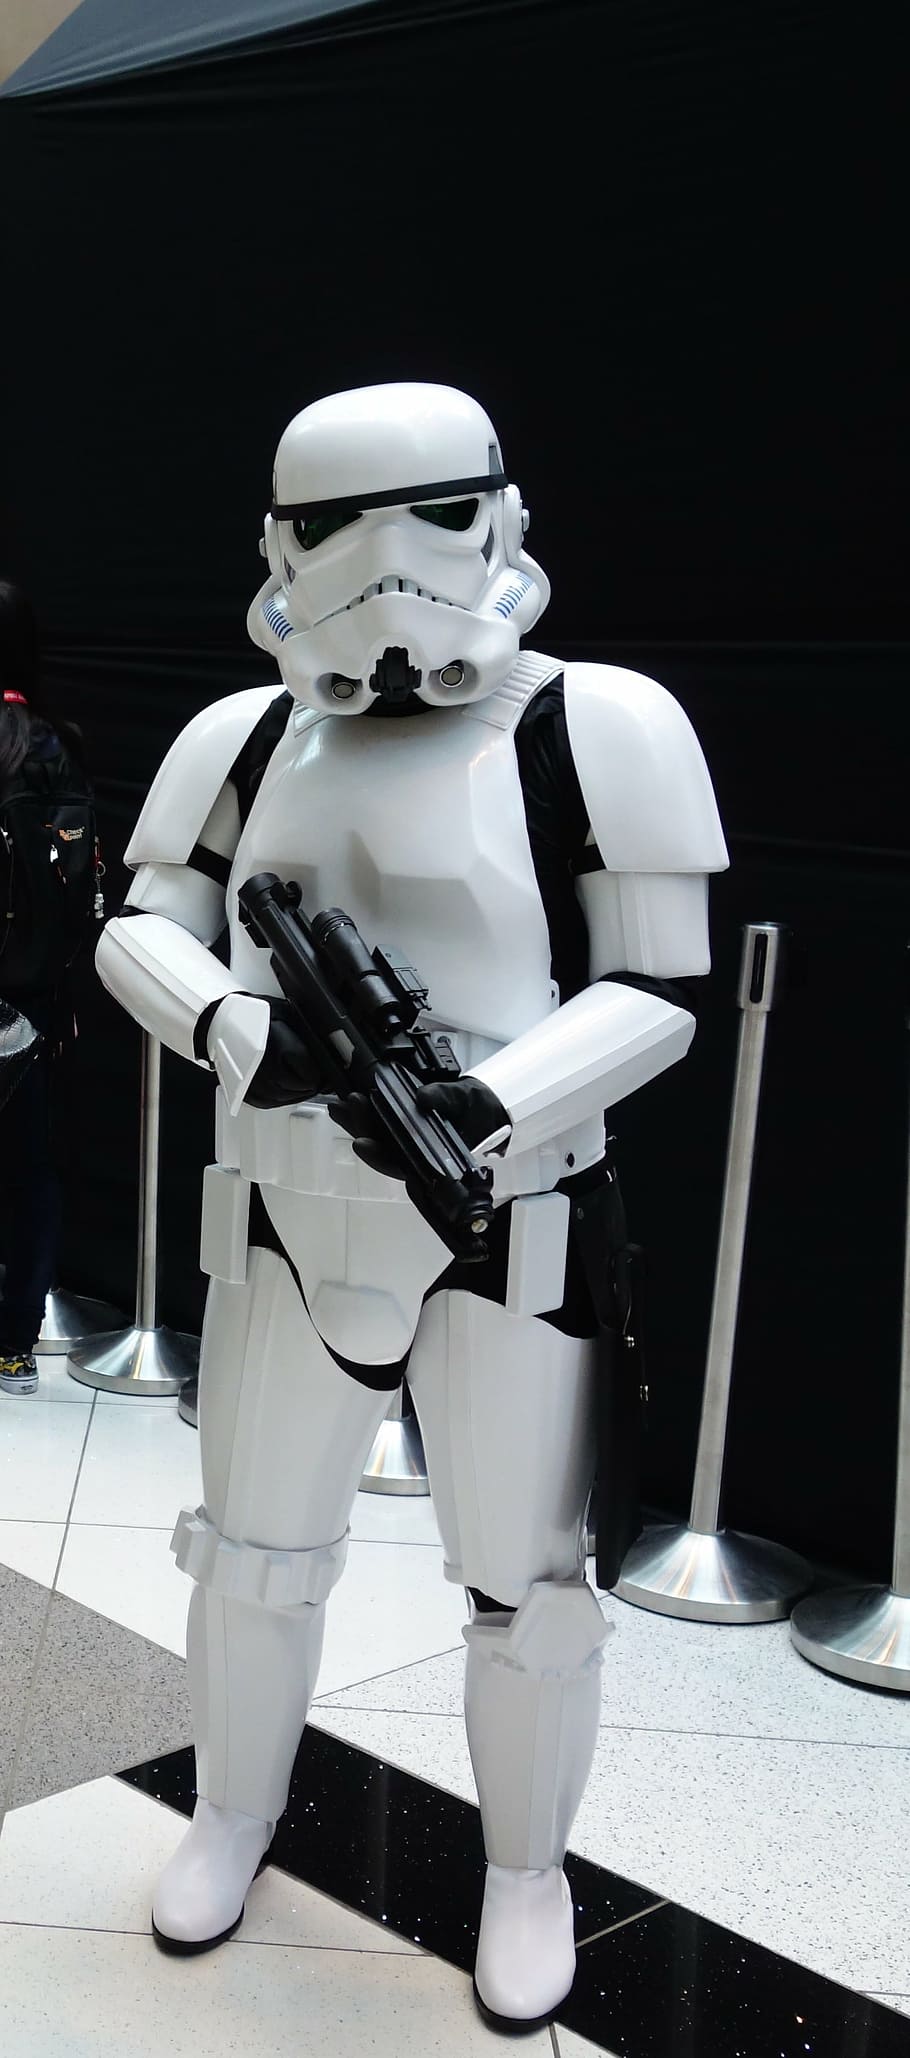 storm trooper, star wars, sci fi, statue, costume, character, armed Forces, suit of Armor, military, human representation